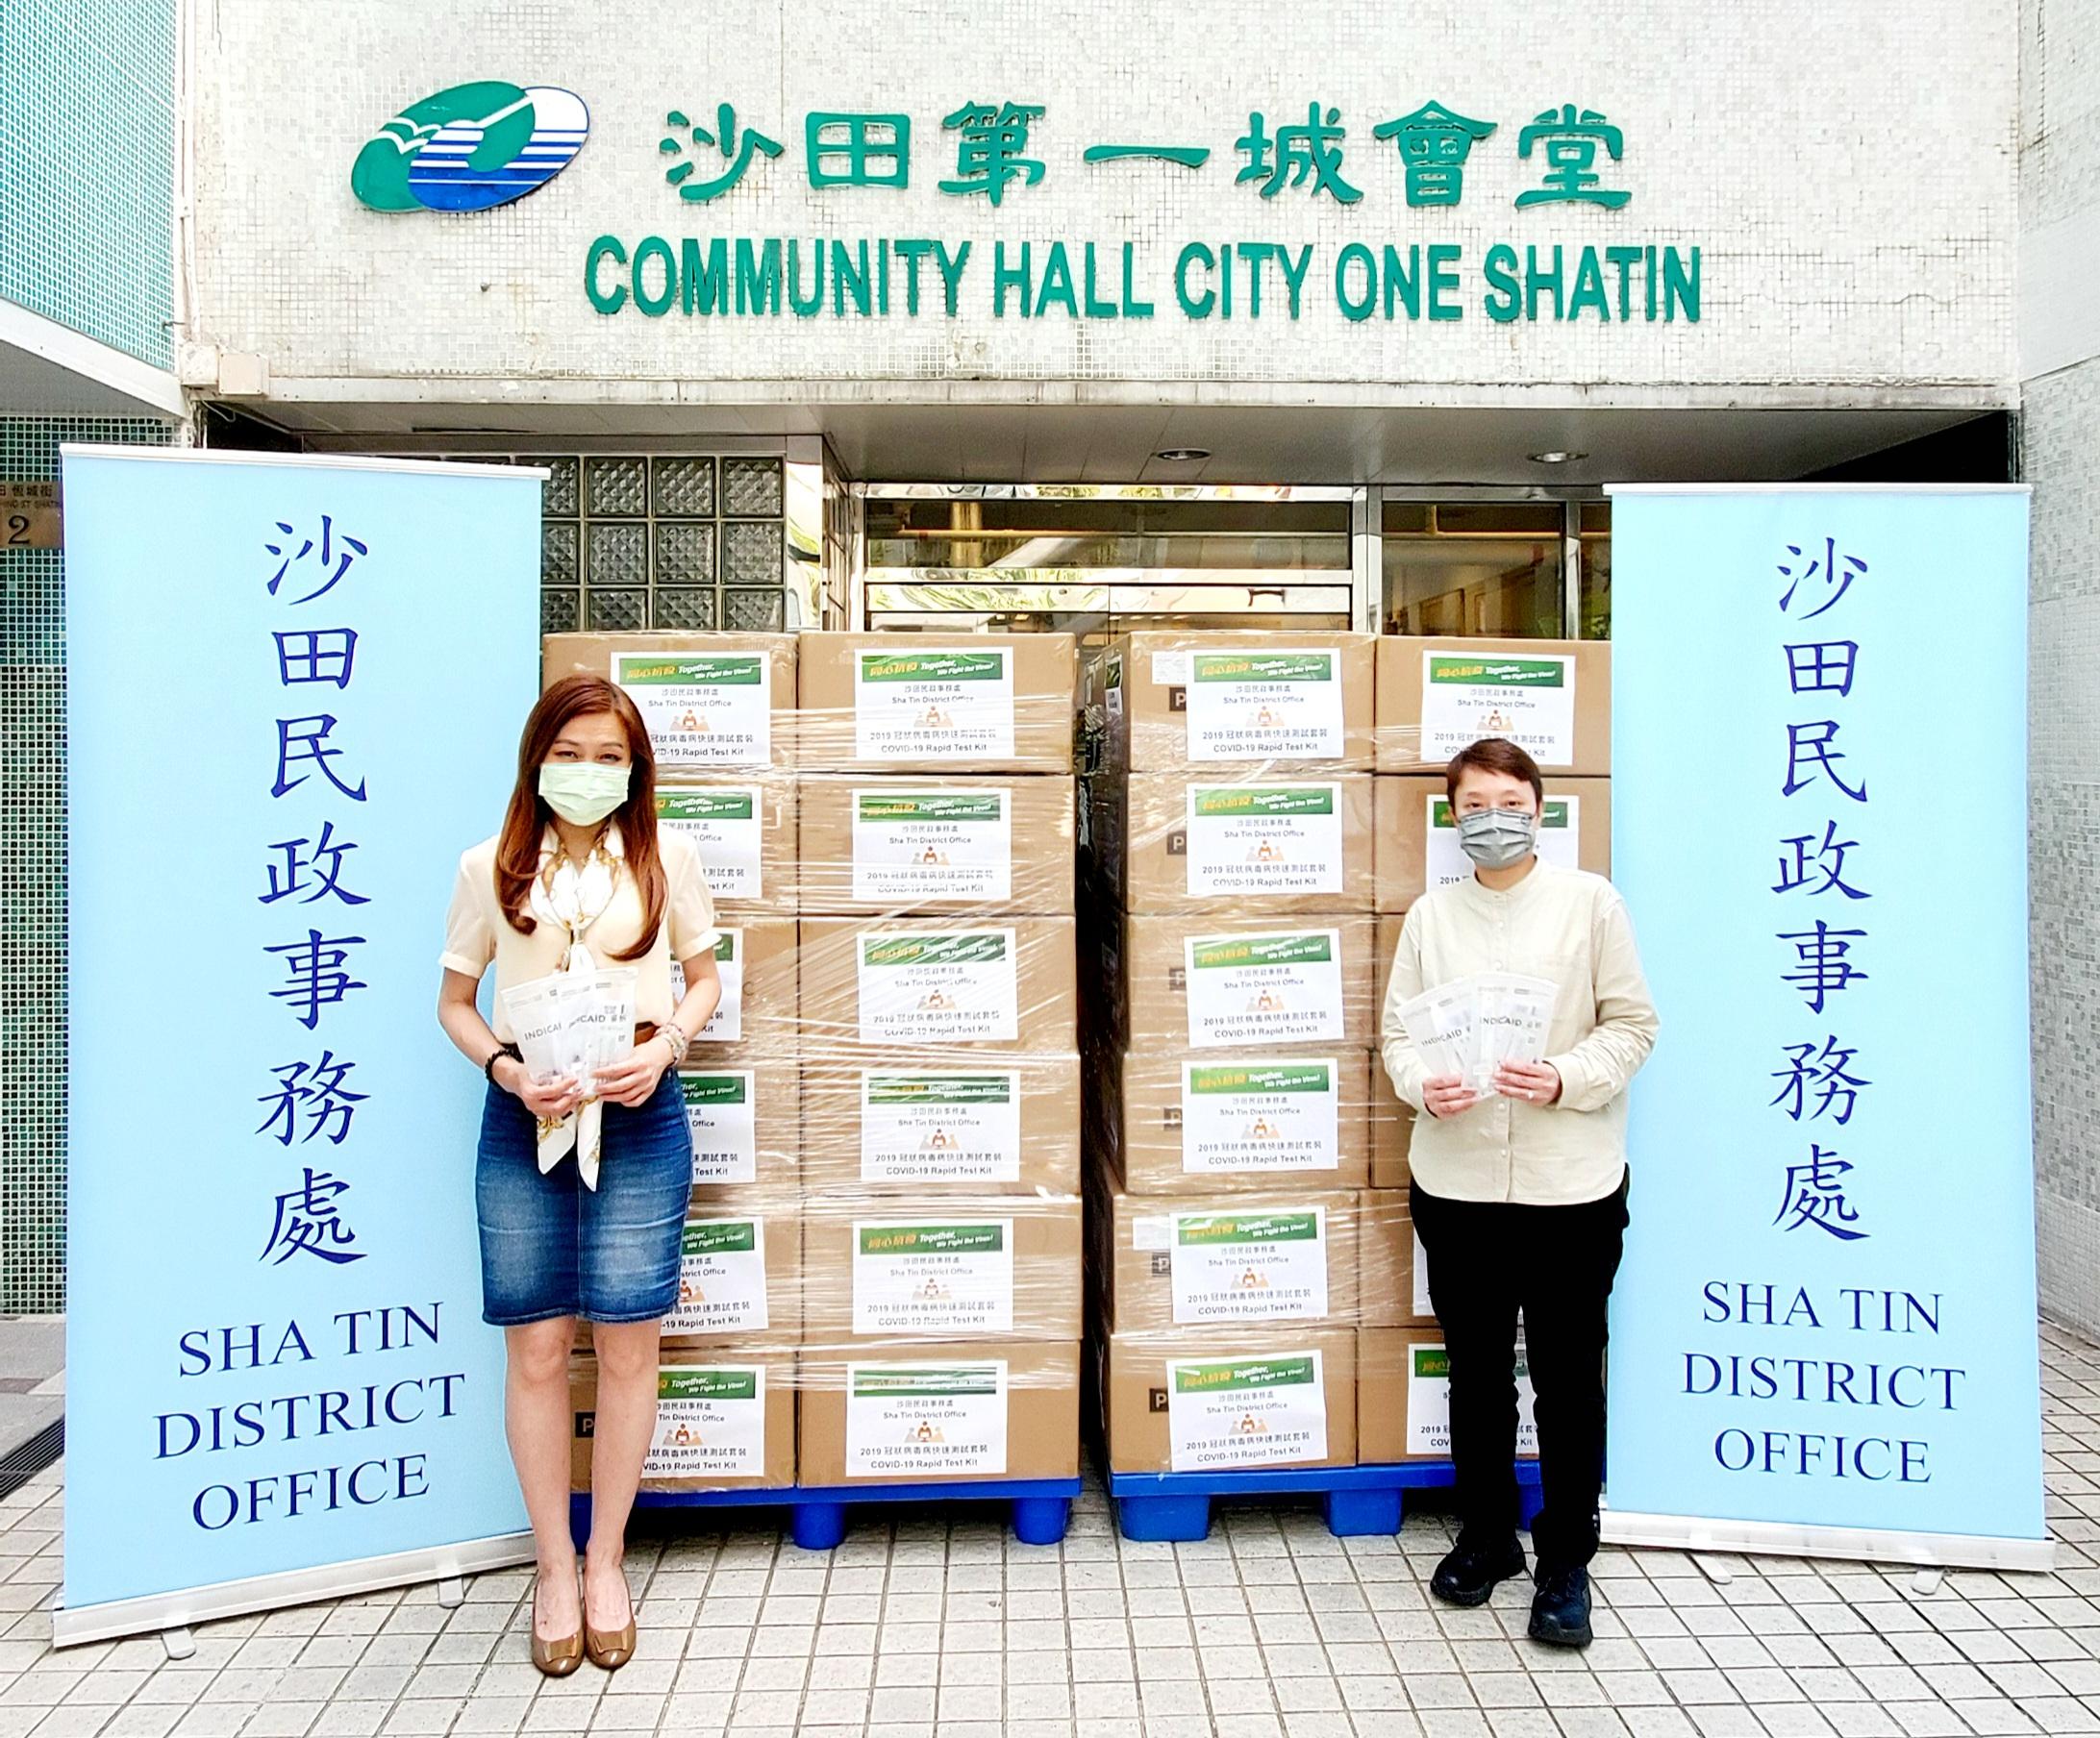 The Sha Tin District Office distributed COVID-19 rapid test kits to households, cleansing workers and property management staff living and working in Block 24 - 33 of City One Shatin for voluntary testing through the property management company.